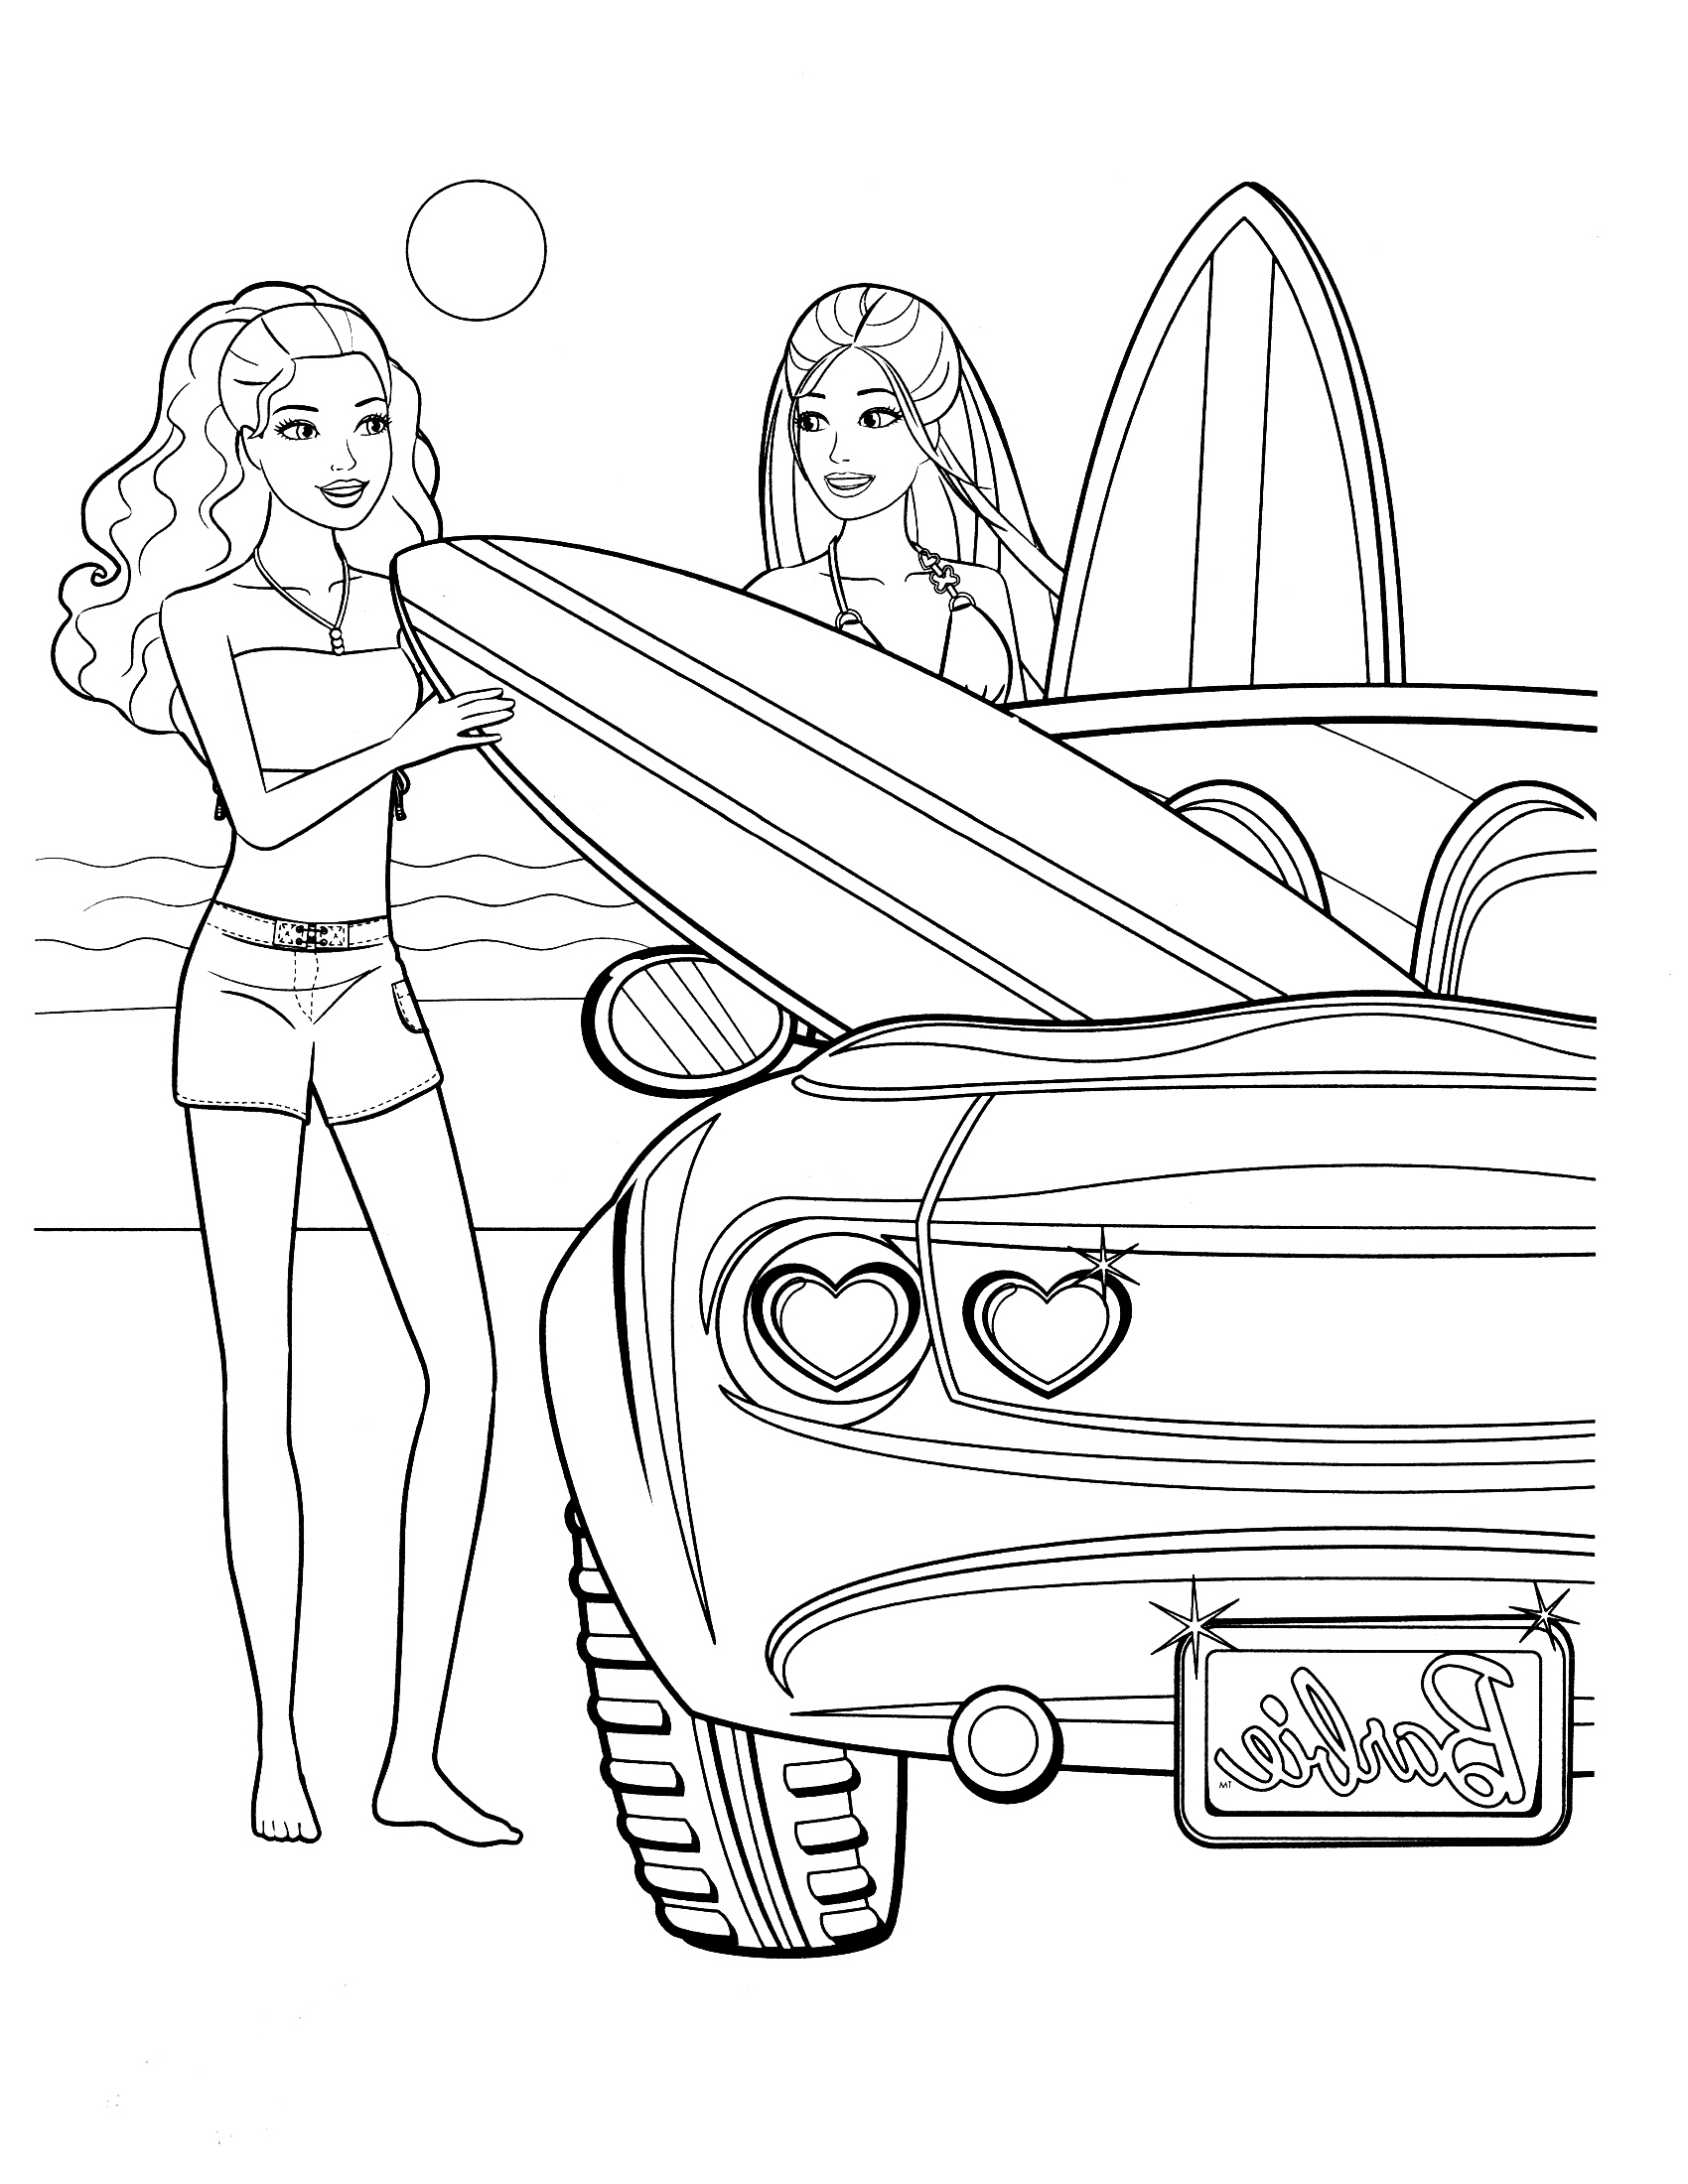 Dream House Coloring Pages at GetColorings.com   Free ...